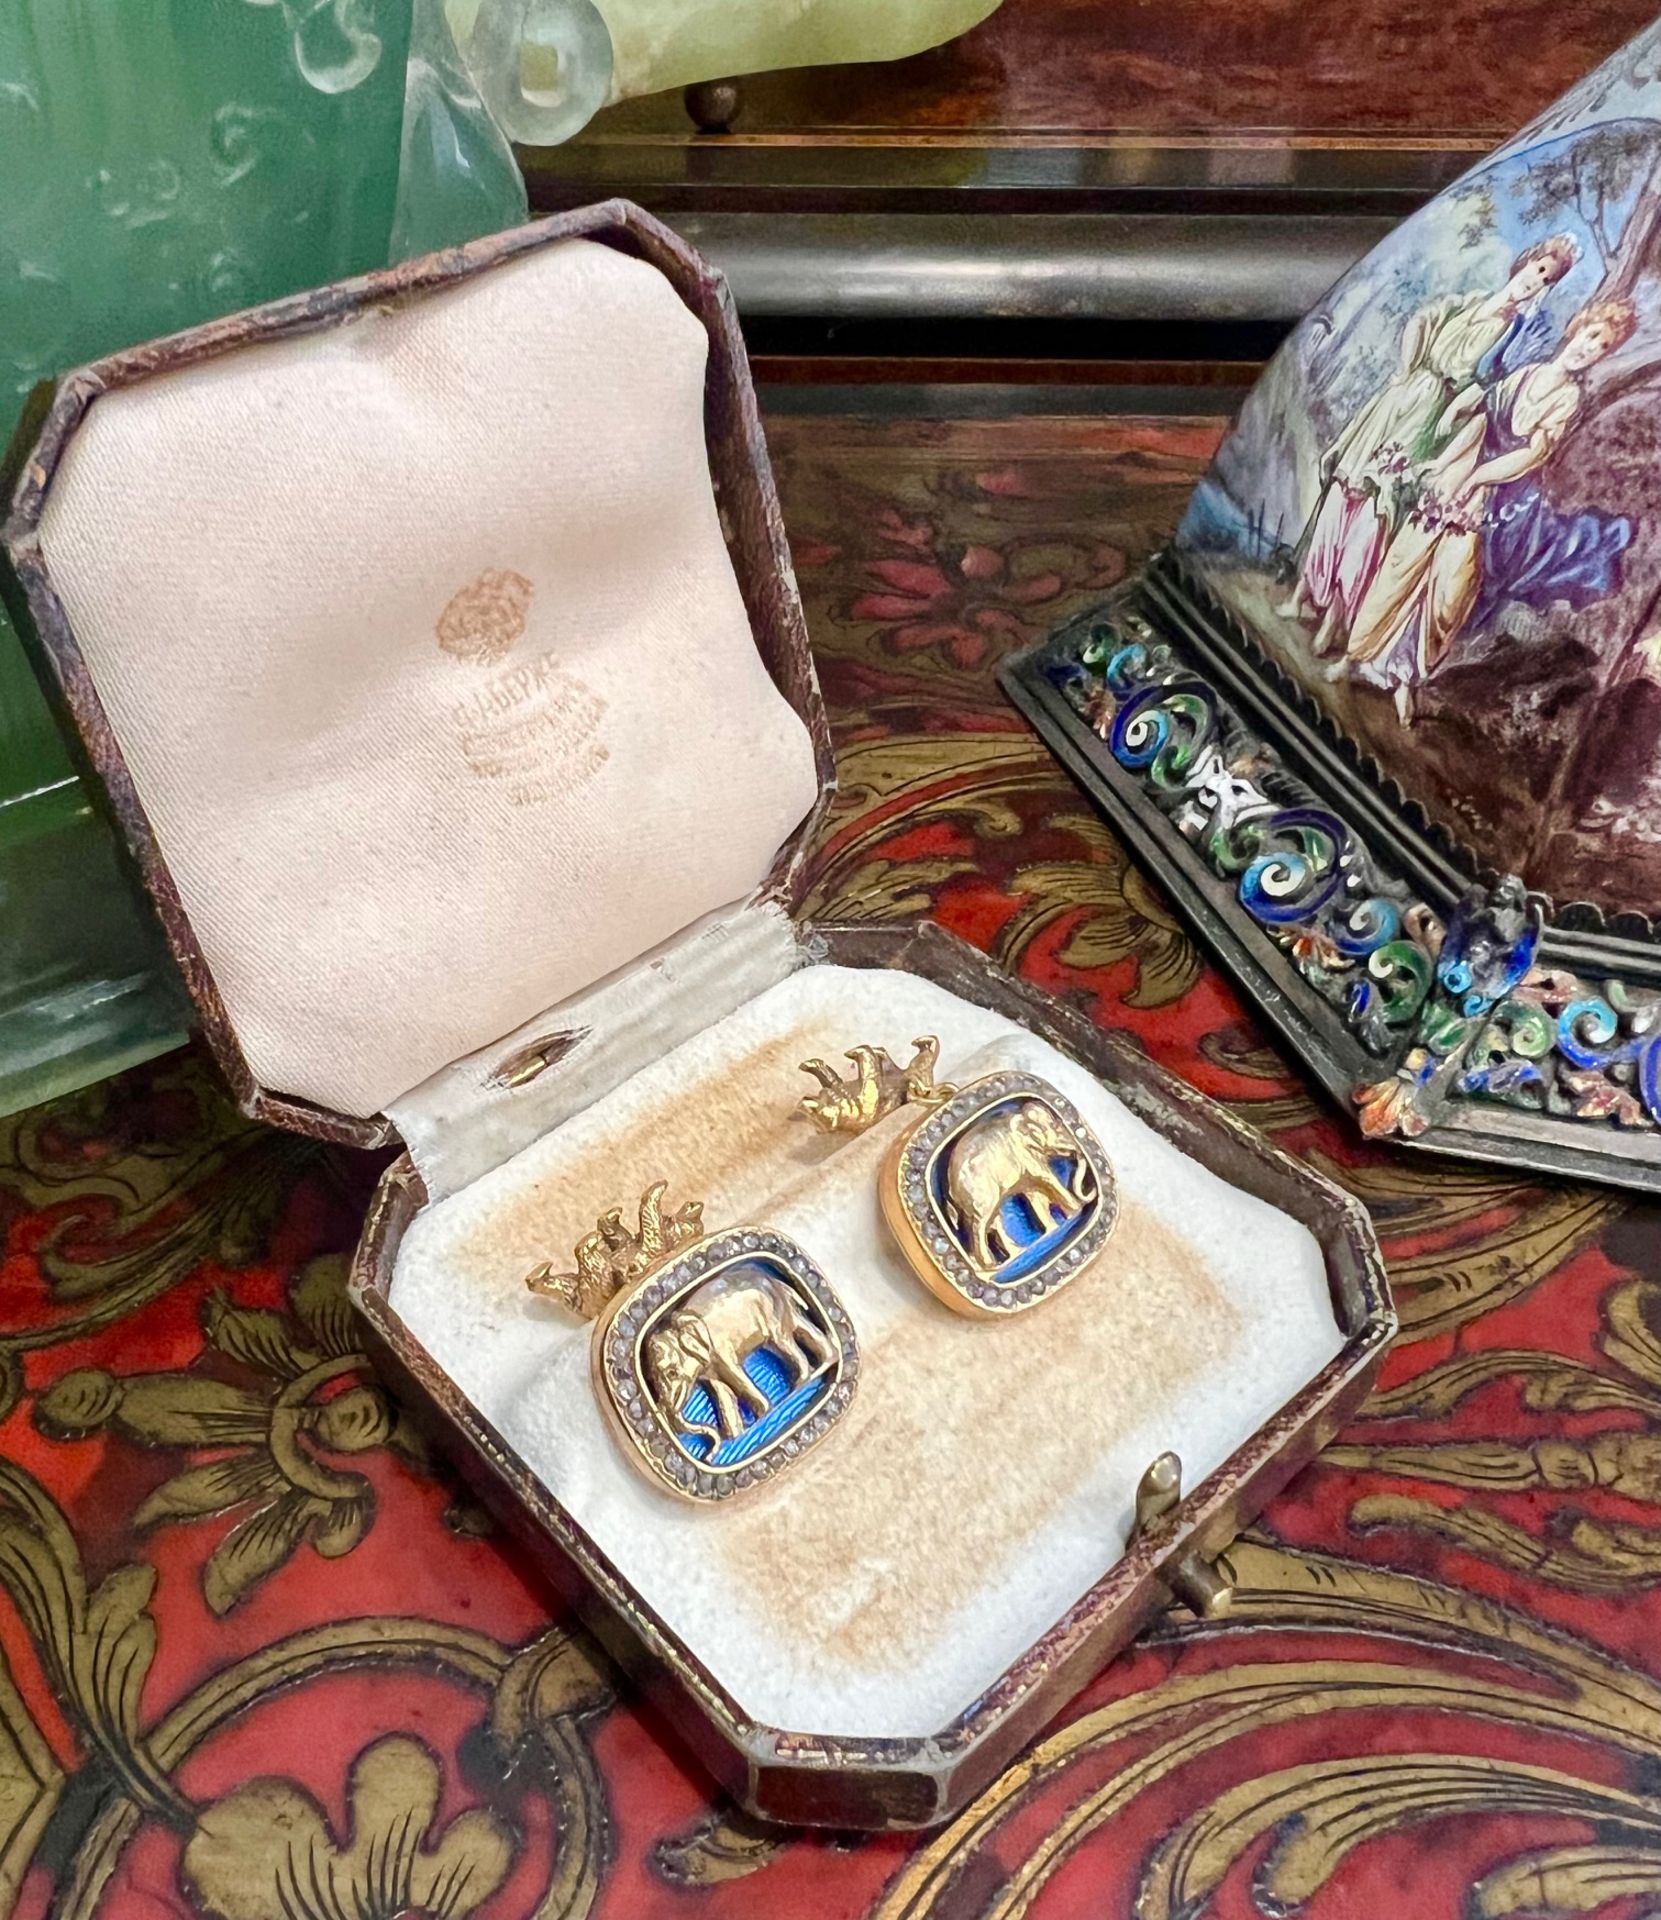 A PAIR OF FABERGE STYLE DIAMOND ENCRUSTED, SILVER GILT AND ENAMELLED CUFFLINKS - Image 5 of 13